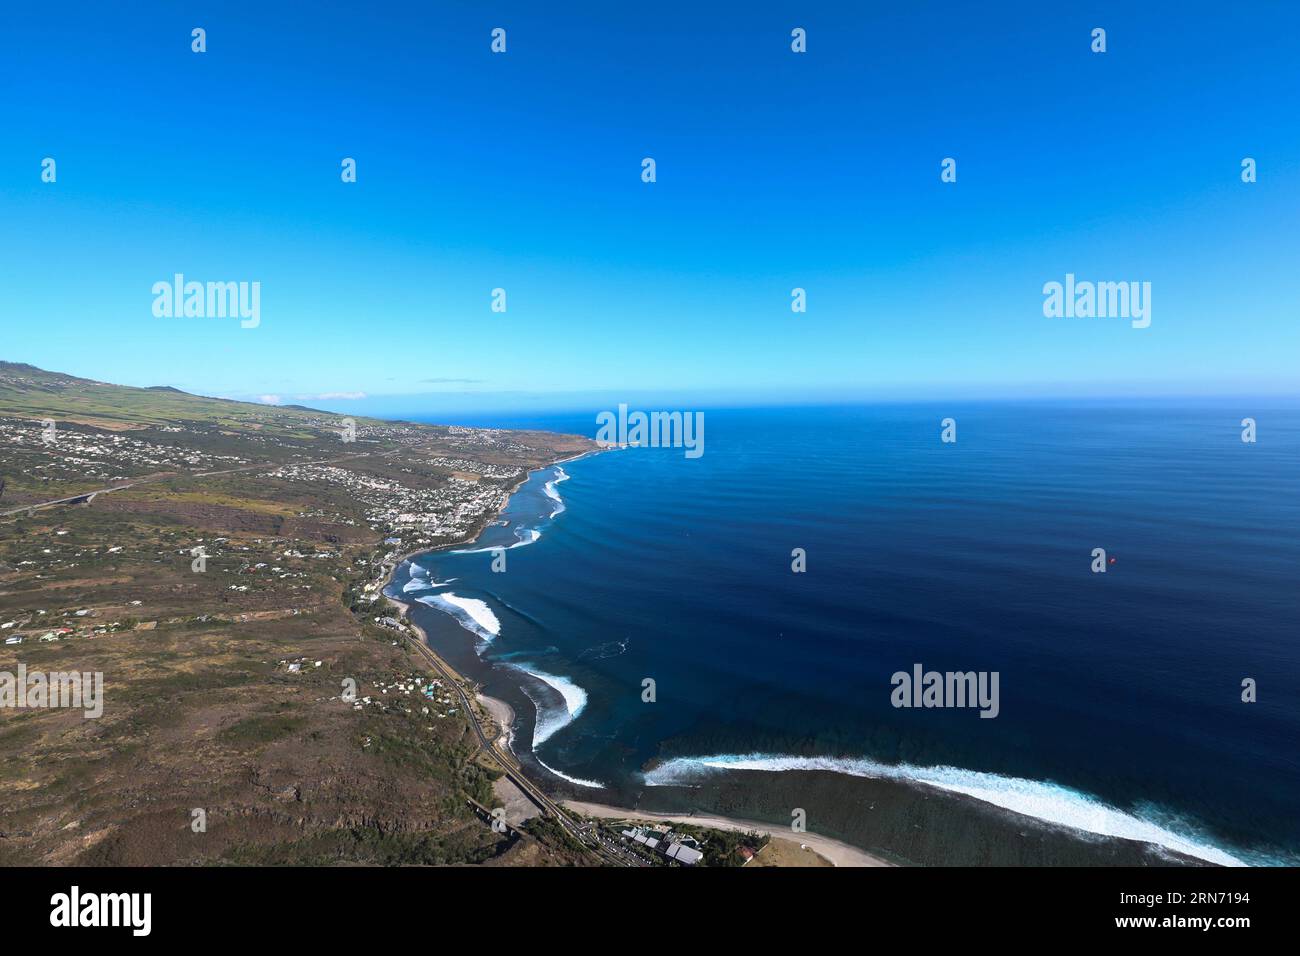 LA REUNION, Aug. 12, 2015 -- Photo taken on Aug. 12, 2015 shows the Saint Leu beach, France s oversea island La Reunion. La Reunion authority Monday said that no clues related to the missing flight MH370 has been found here since the launch of a tridimensional search last Friday. ) LA REUNION-MH370 DEBRIS-SEARCH-CONTINUE PanxSiwei PUBLICATIONxNOTxINxCHN   La Reunion Aug 12 2015 Photo Taken ON Aug 12 2015 Shows The Saint Leu Beach France S Oversea Iceland La Reunion La Reunion Authority Monday Said Thatcher No clues RELATED to The Missing Flight MH370 has been Found Here Since The Launch of a T Stock Photo